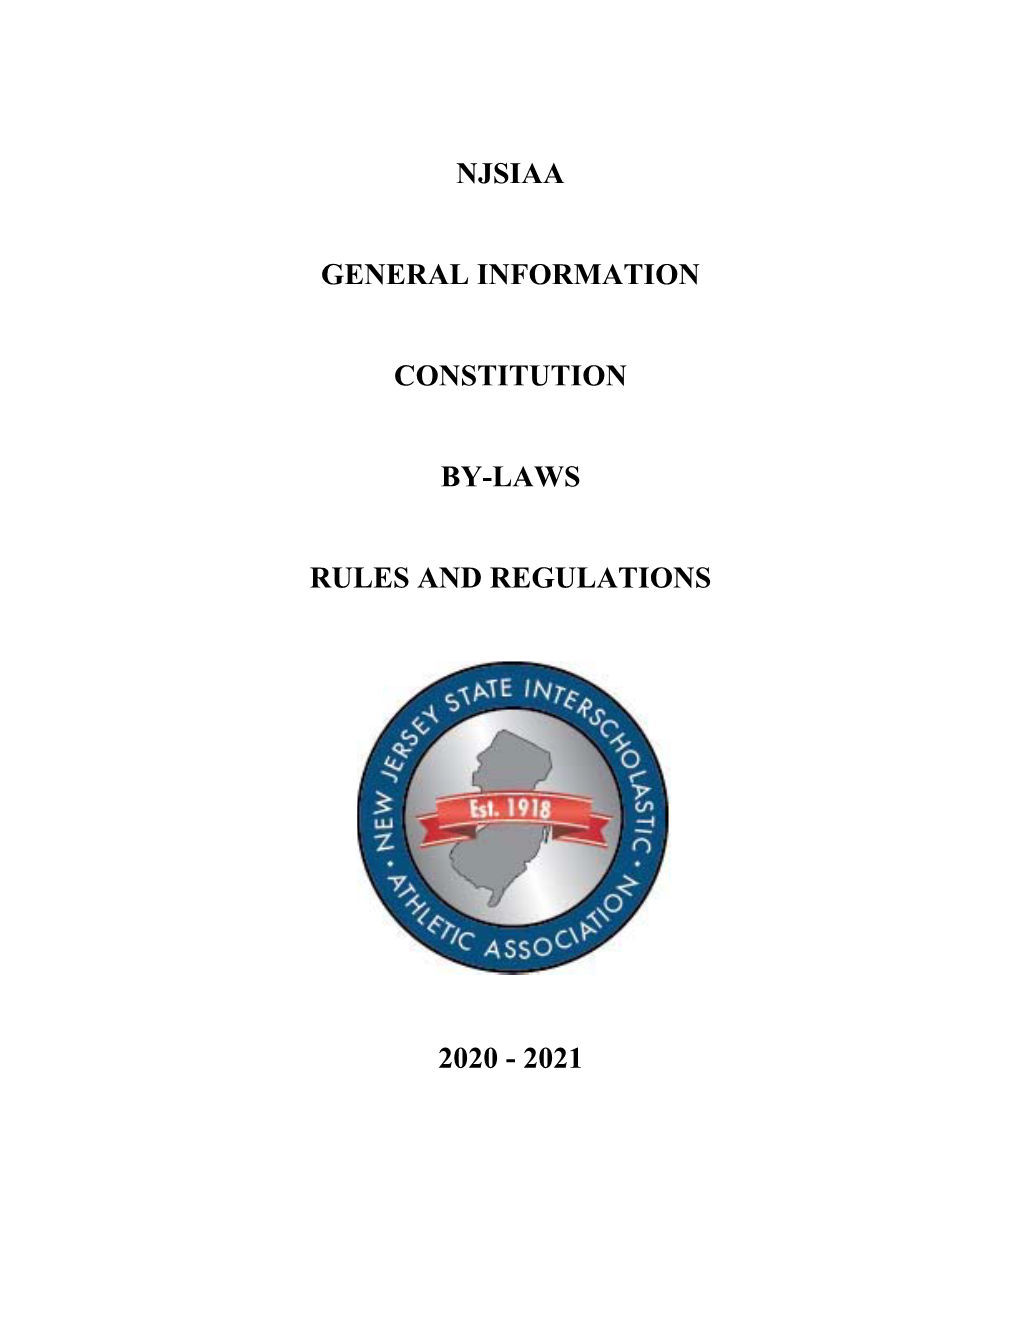 Njsiaa General Information Constitution By-Laws Rules